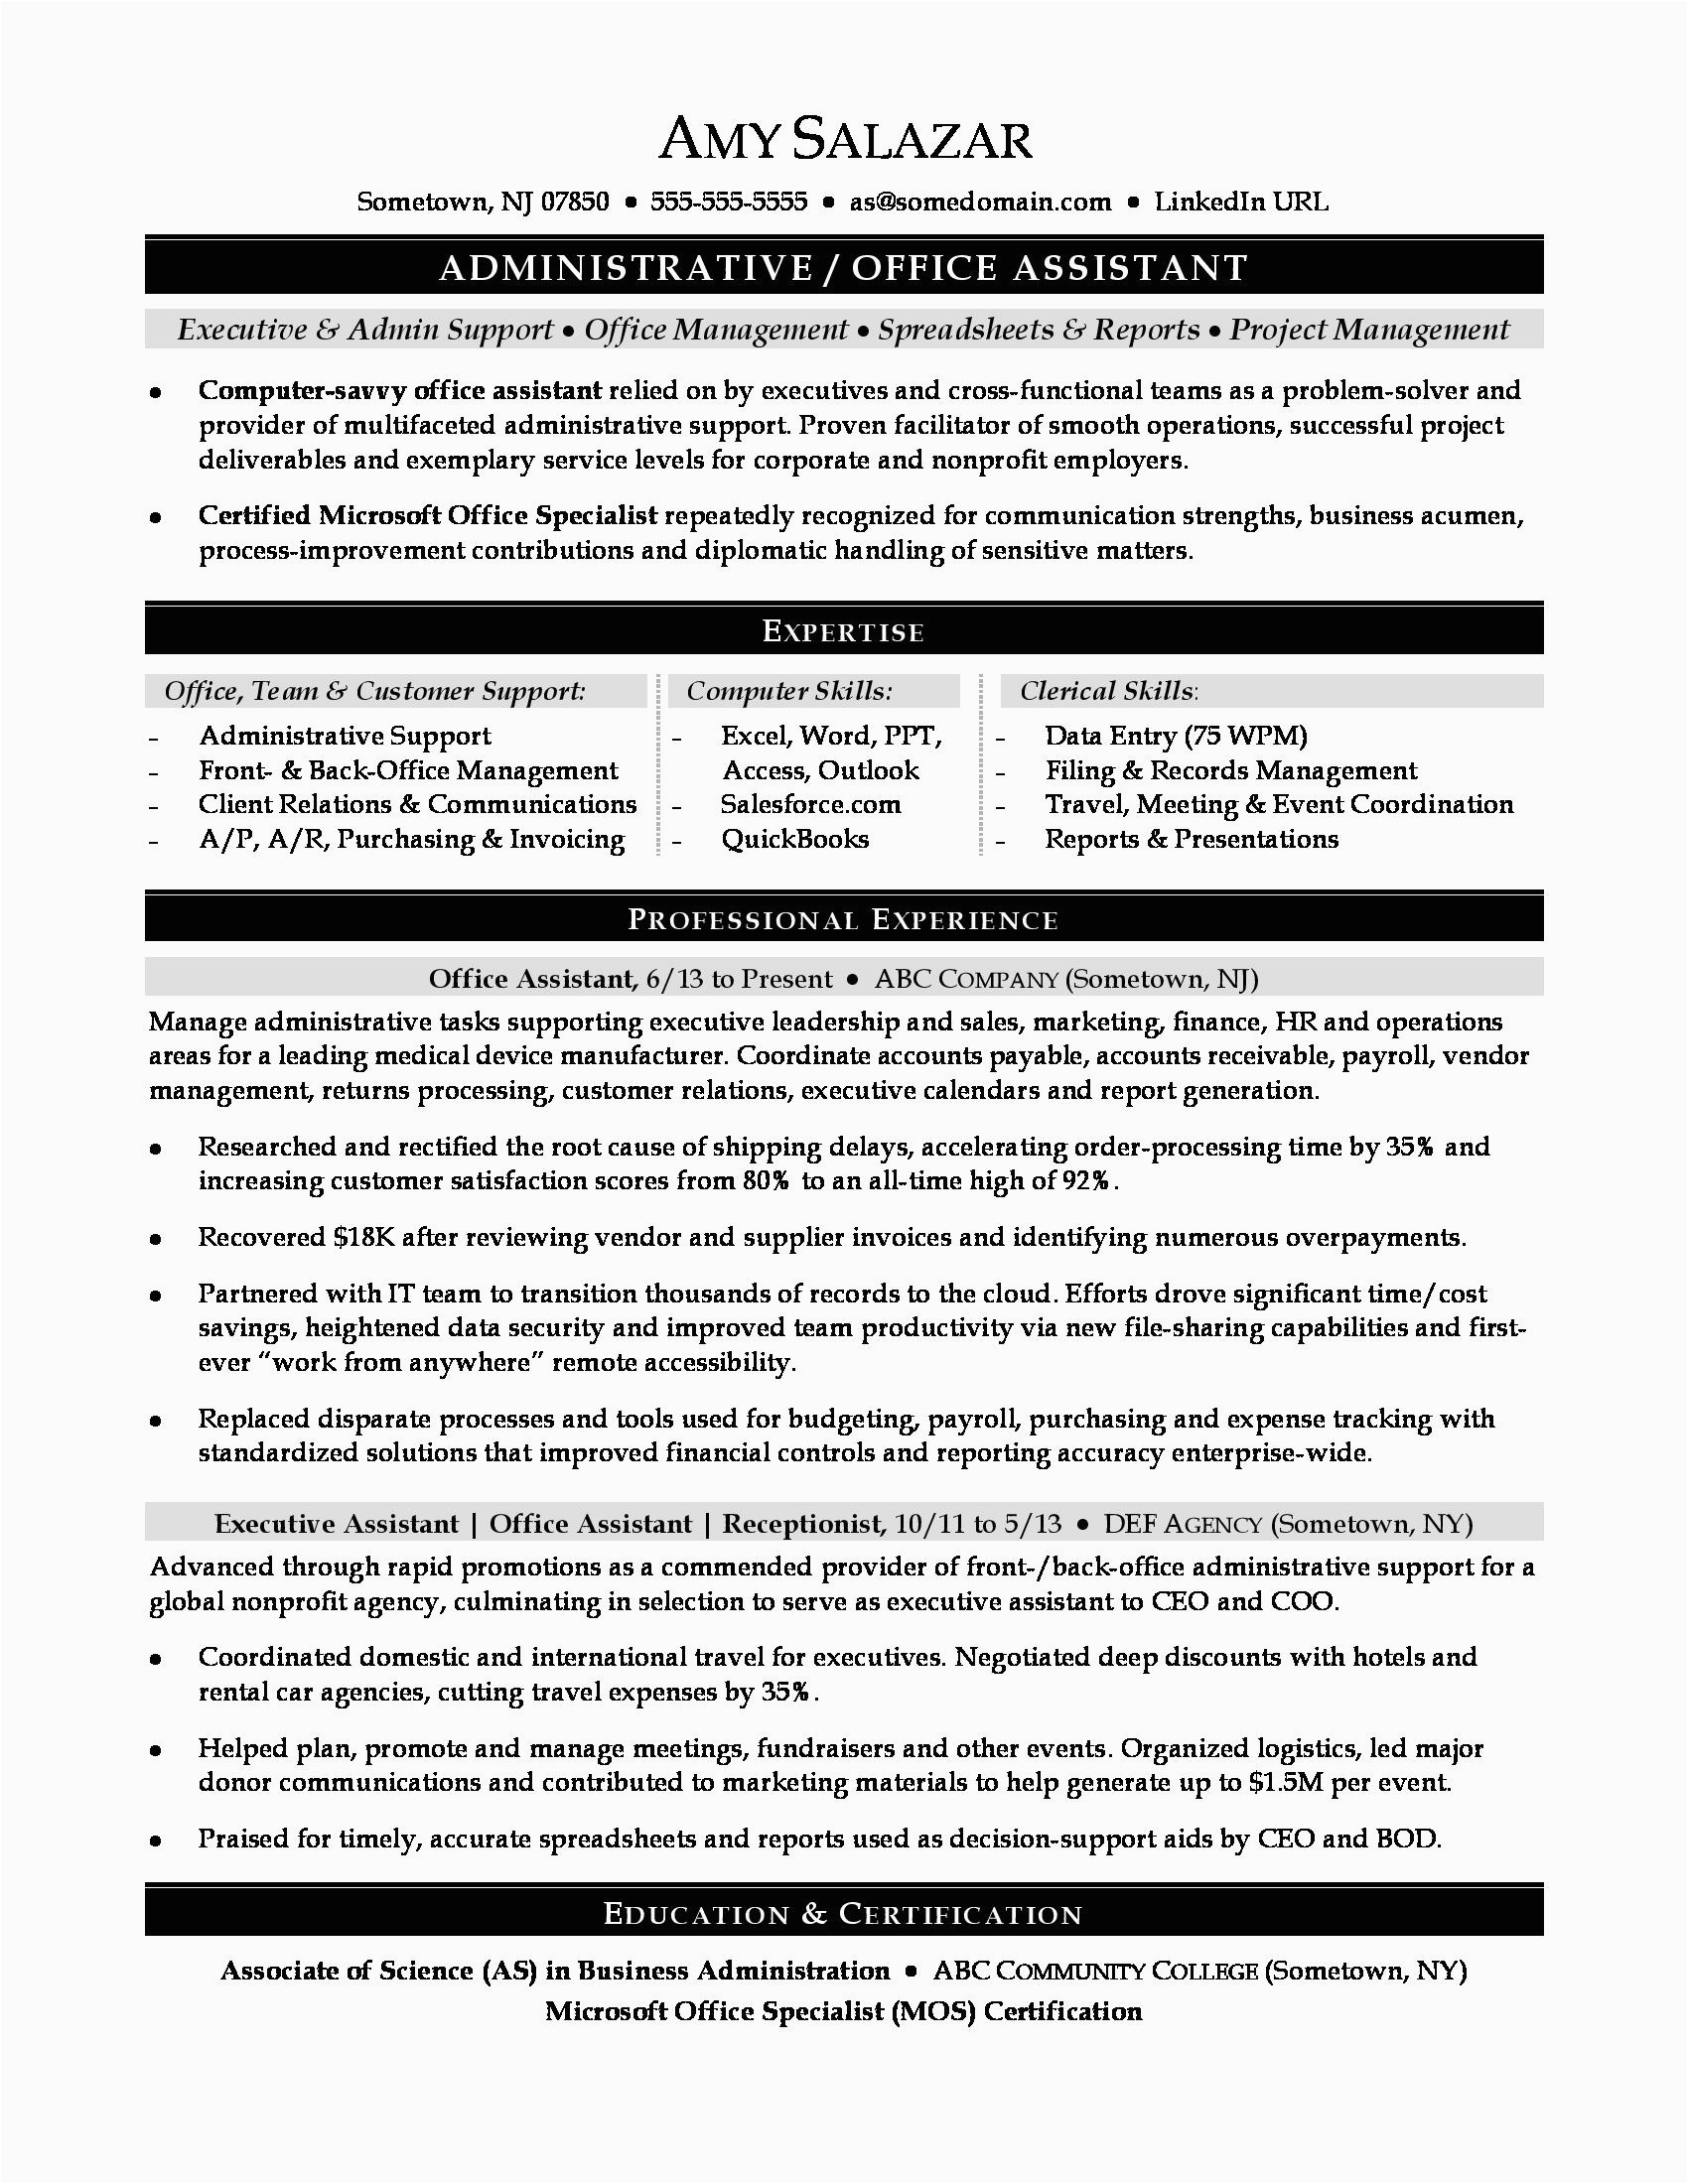 Sample Of Resume for Office Staff Position Fice assistant Sample Resume